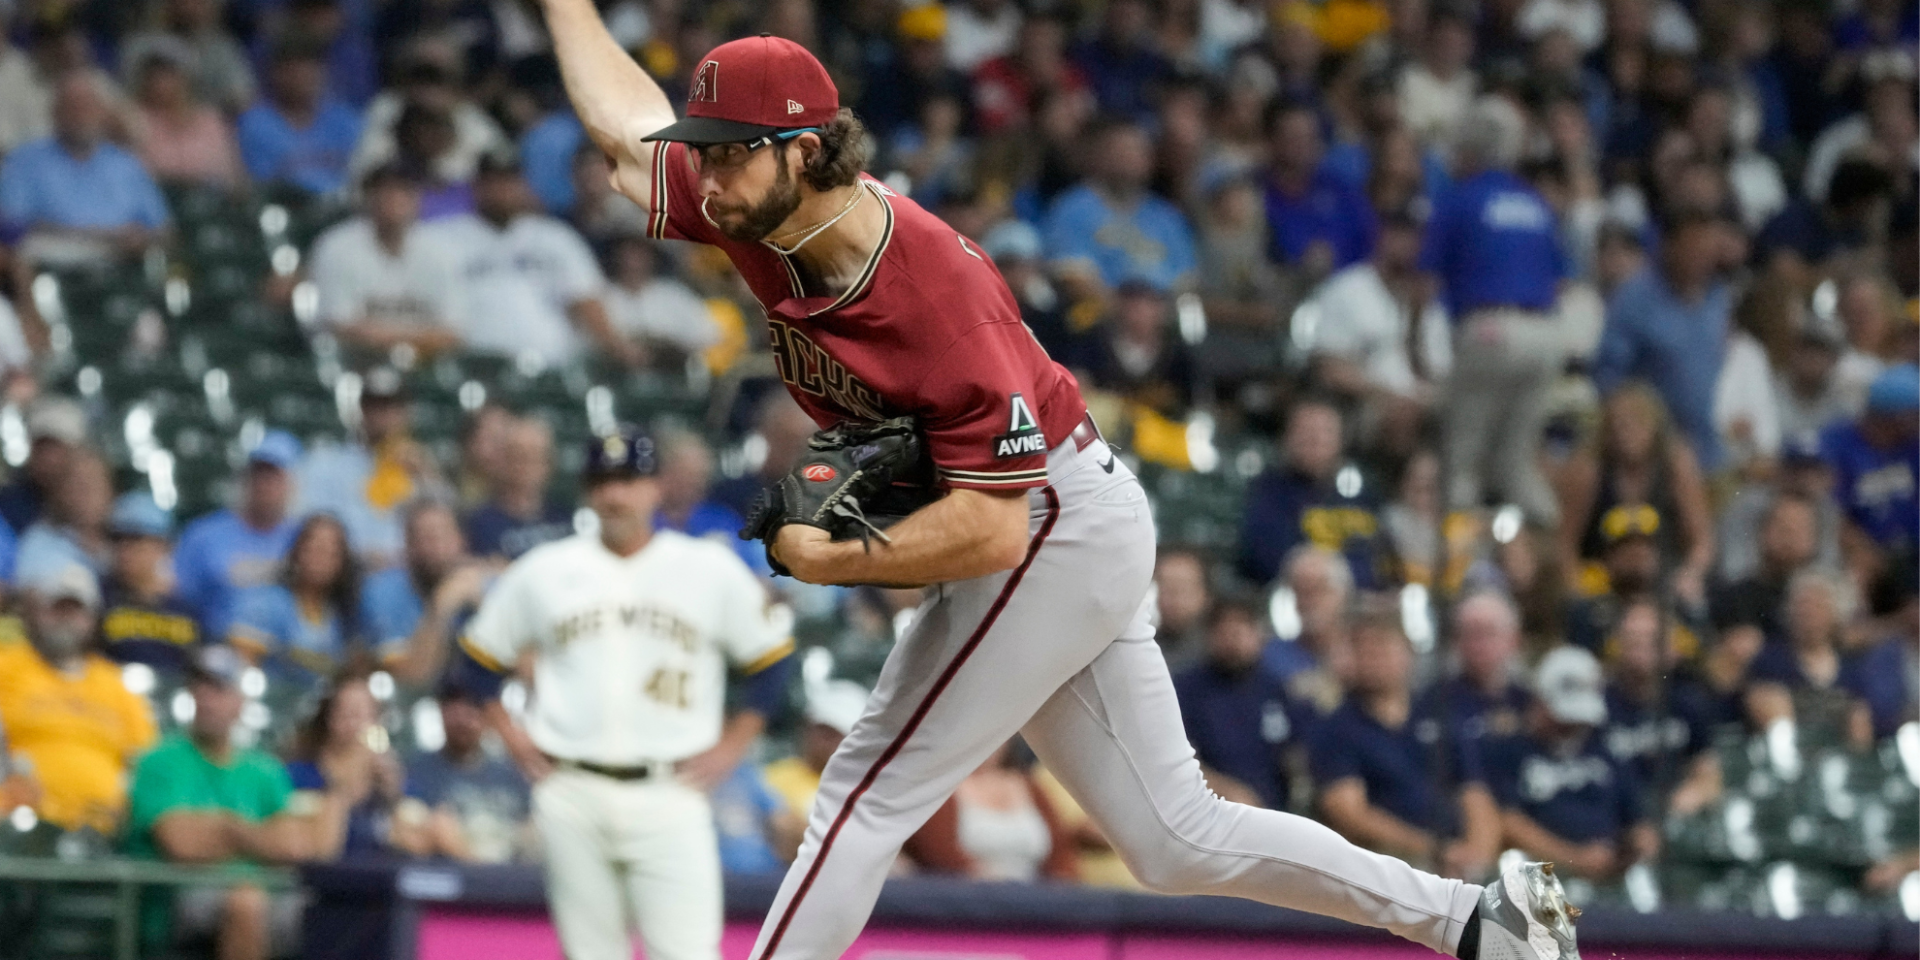 Diamondbacks rally again to eliminate Brewers, book spot in NLDS